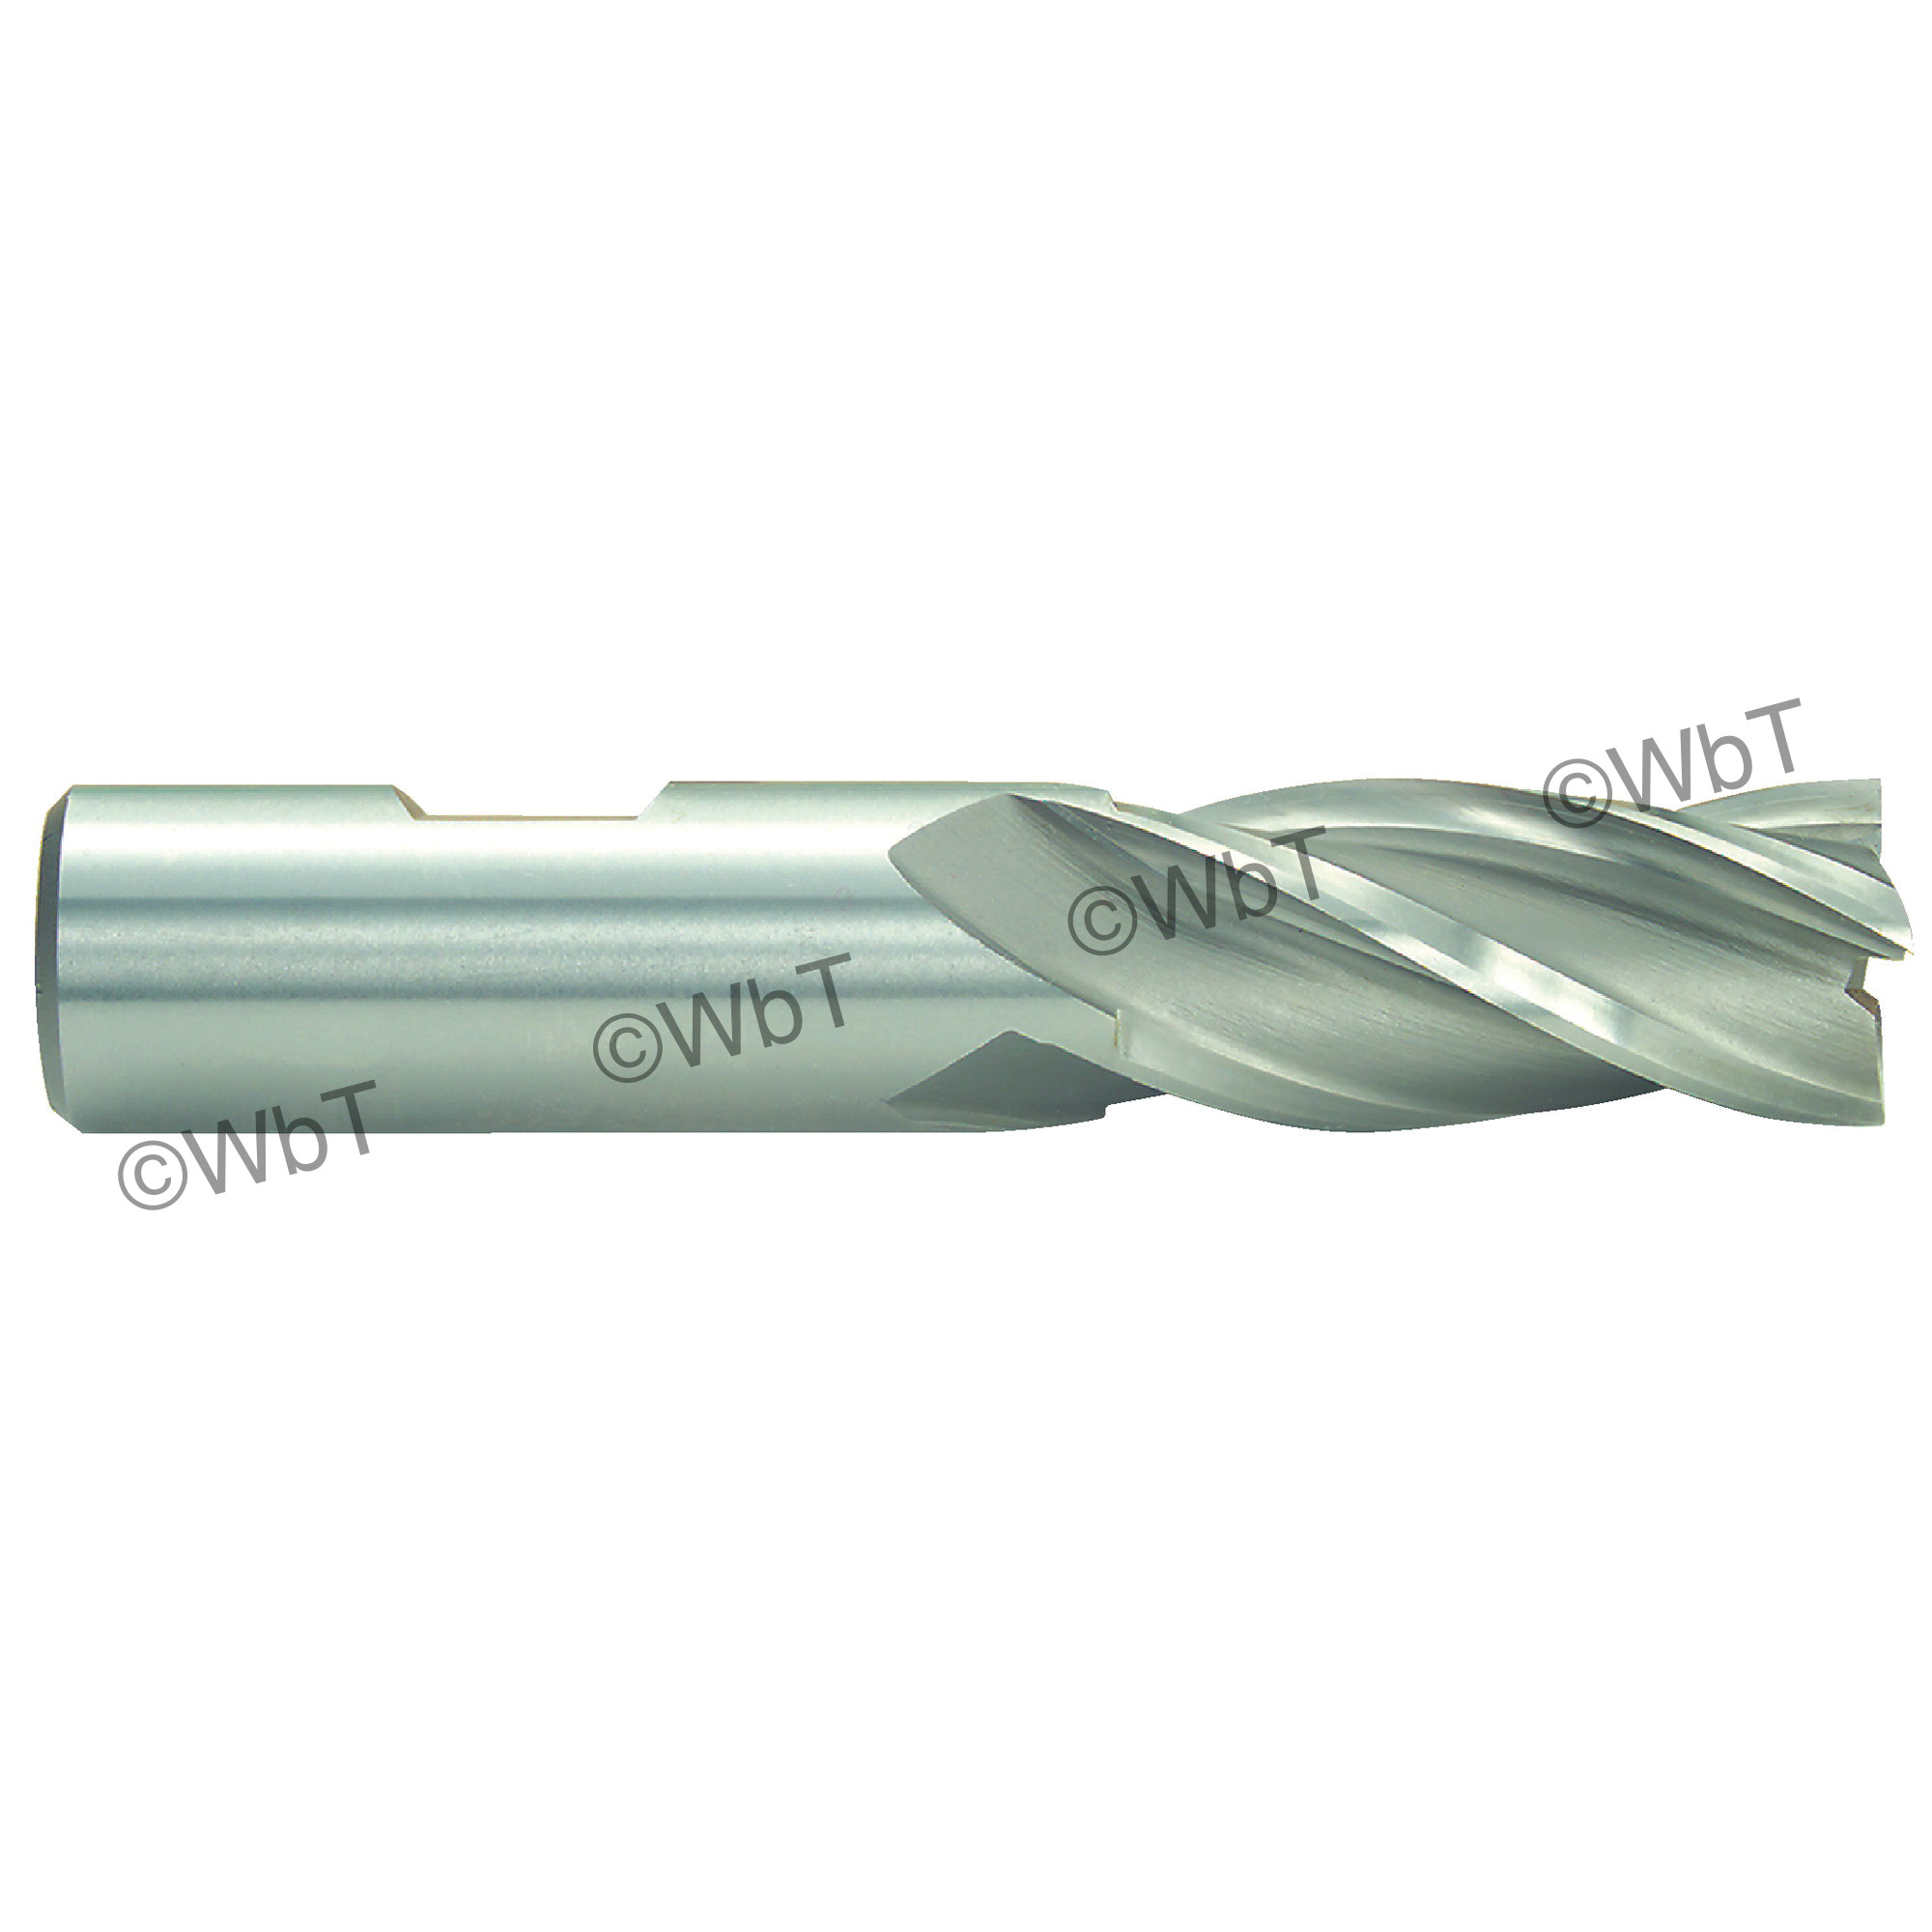 TTC 08-005-060 D2 General Purpose Non-Center Cutting Single Square End Mill, 1/4 in Dia Cutter, 5/8 in Length of Cut, 4 Flutes, 3/8 in Dia Shank, 2-7/16 in OAL, Bright